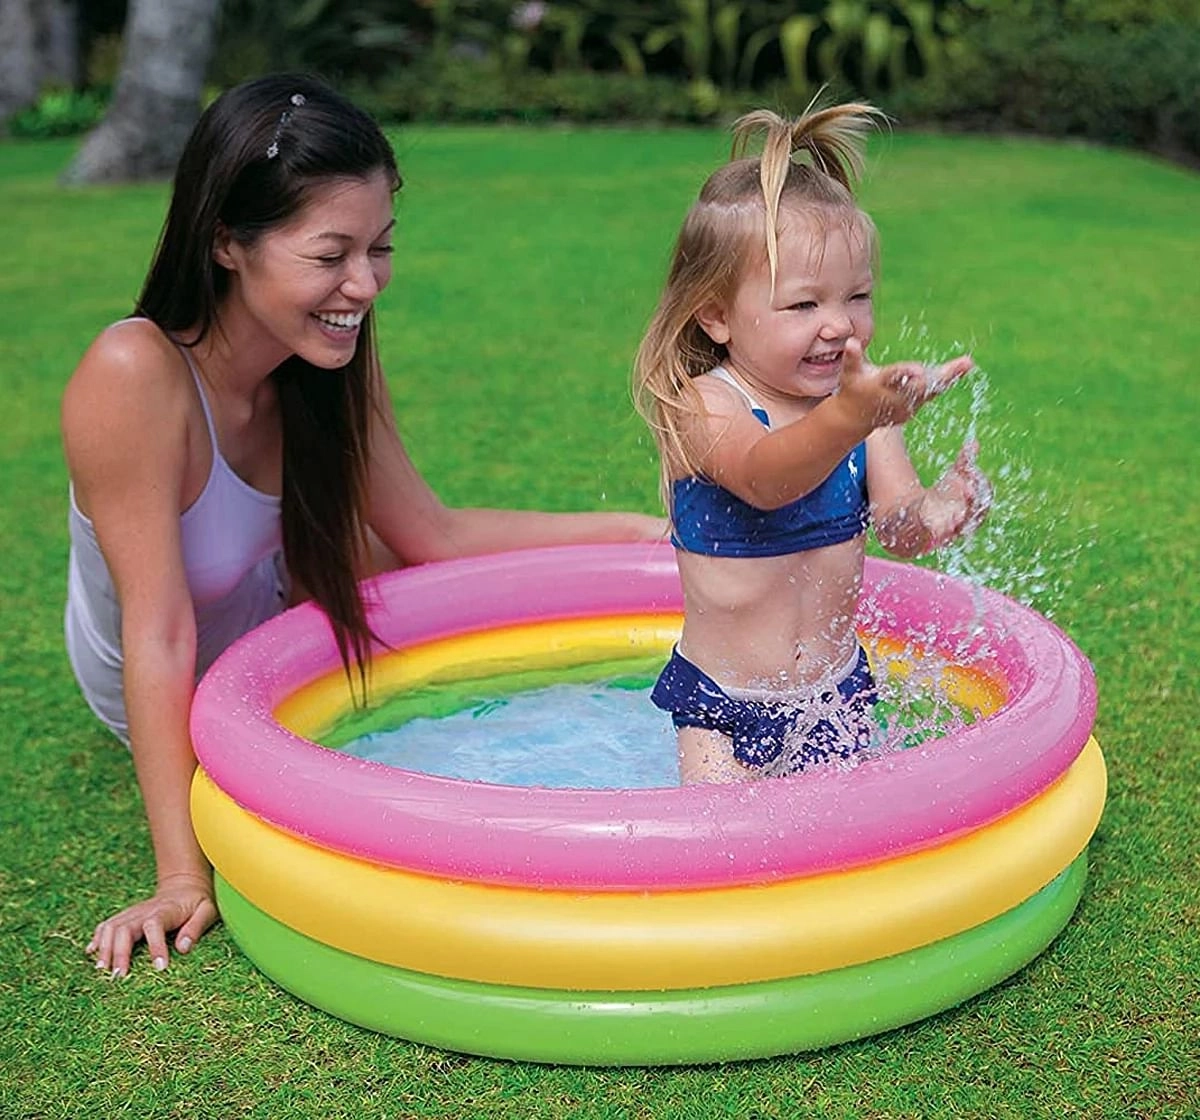 Intex Sunset Glow Pool 3 Feet Water Play for Kids 12M+, Multicolour